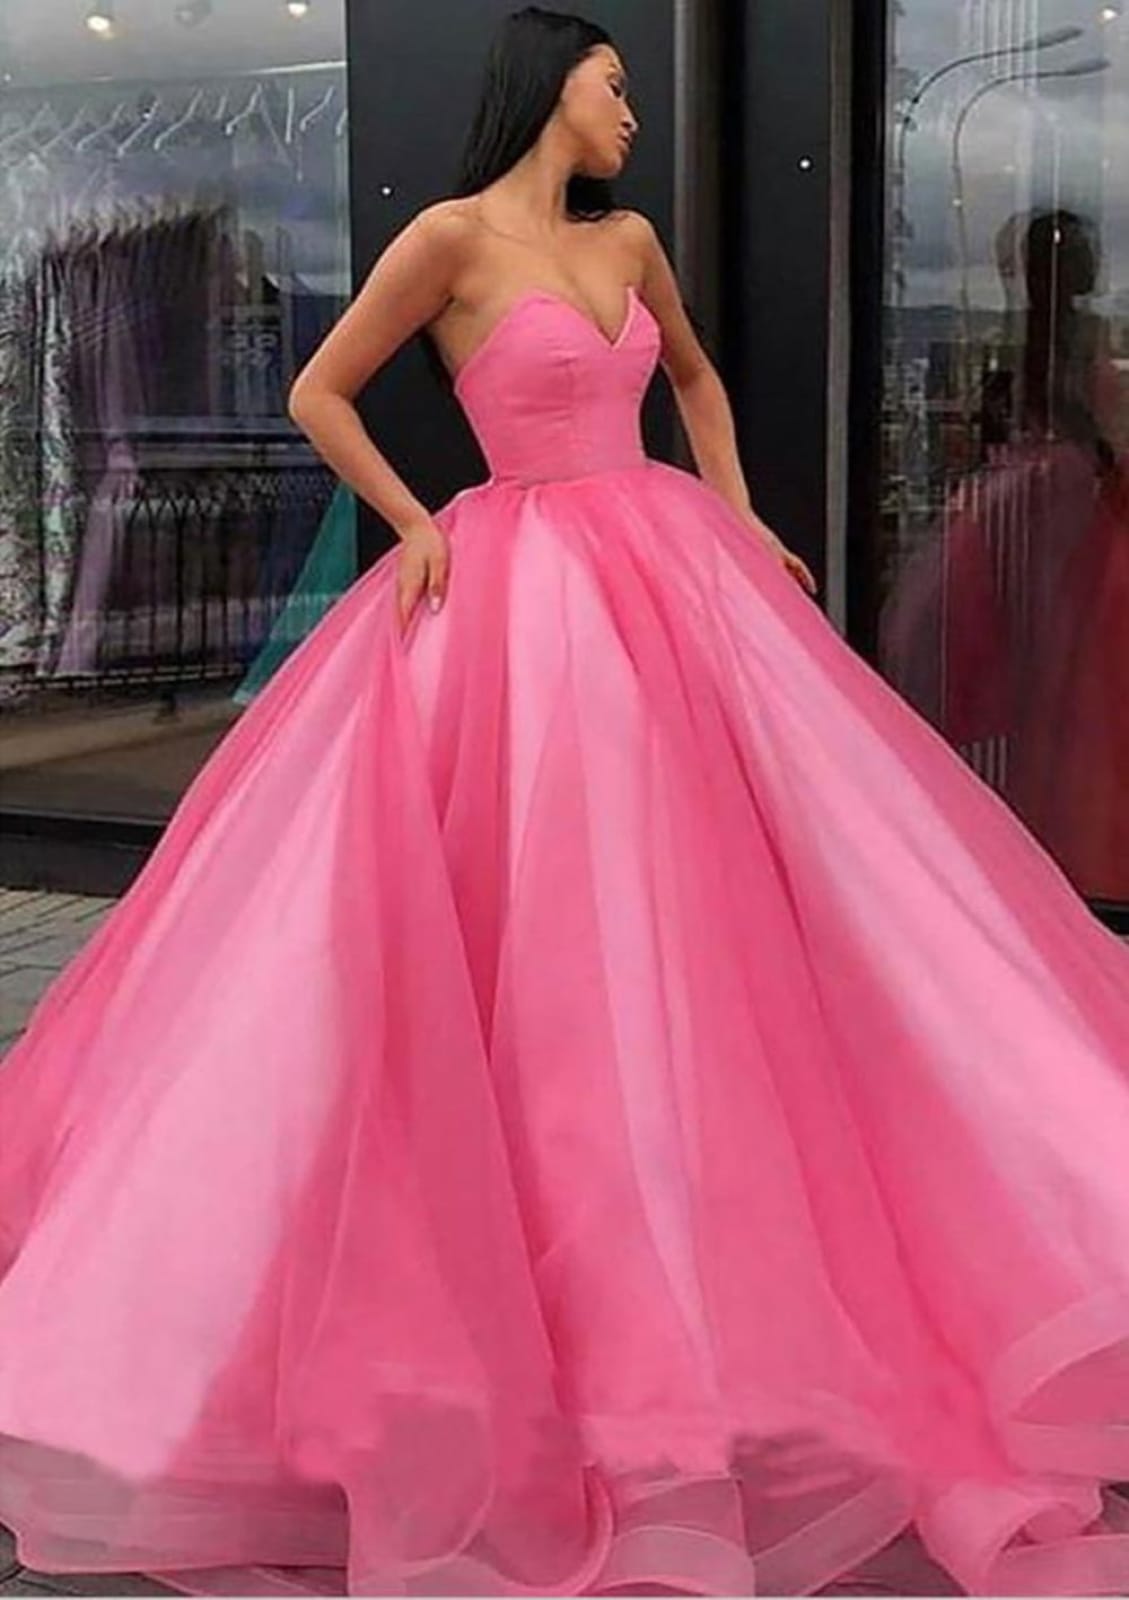 Strapless Sweetheart Ball Gown Floor-Length Organza Party Prom Dress, Horsehair Hem